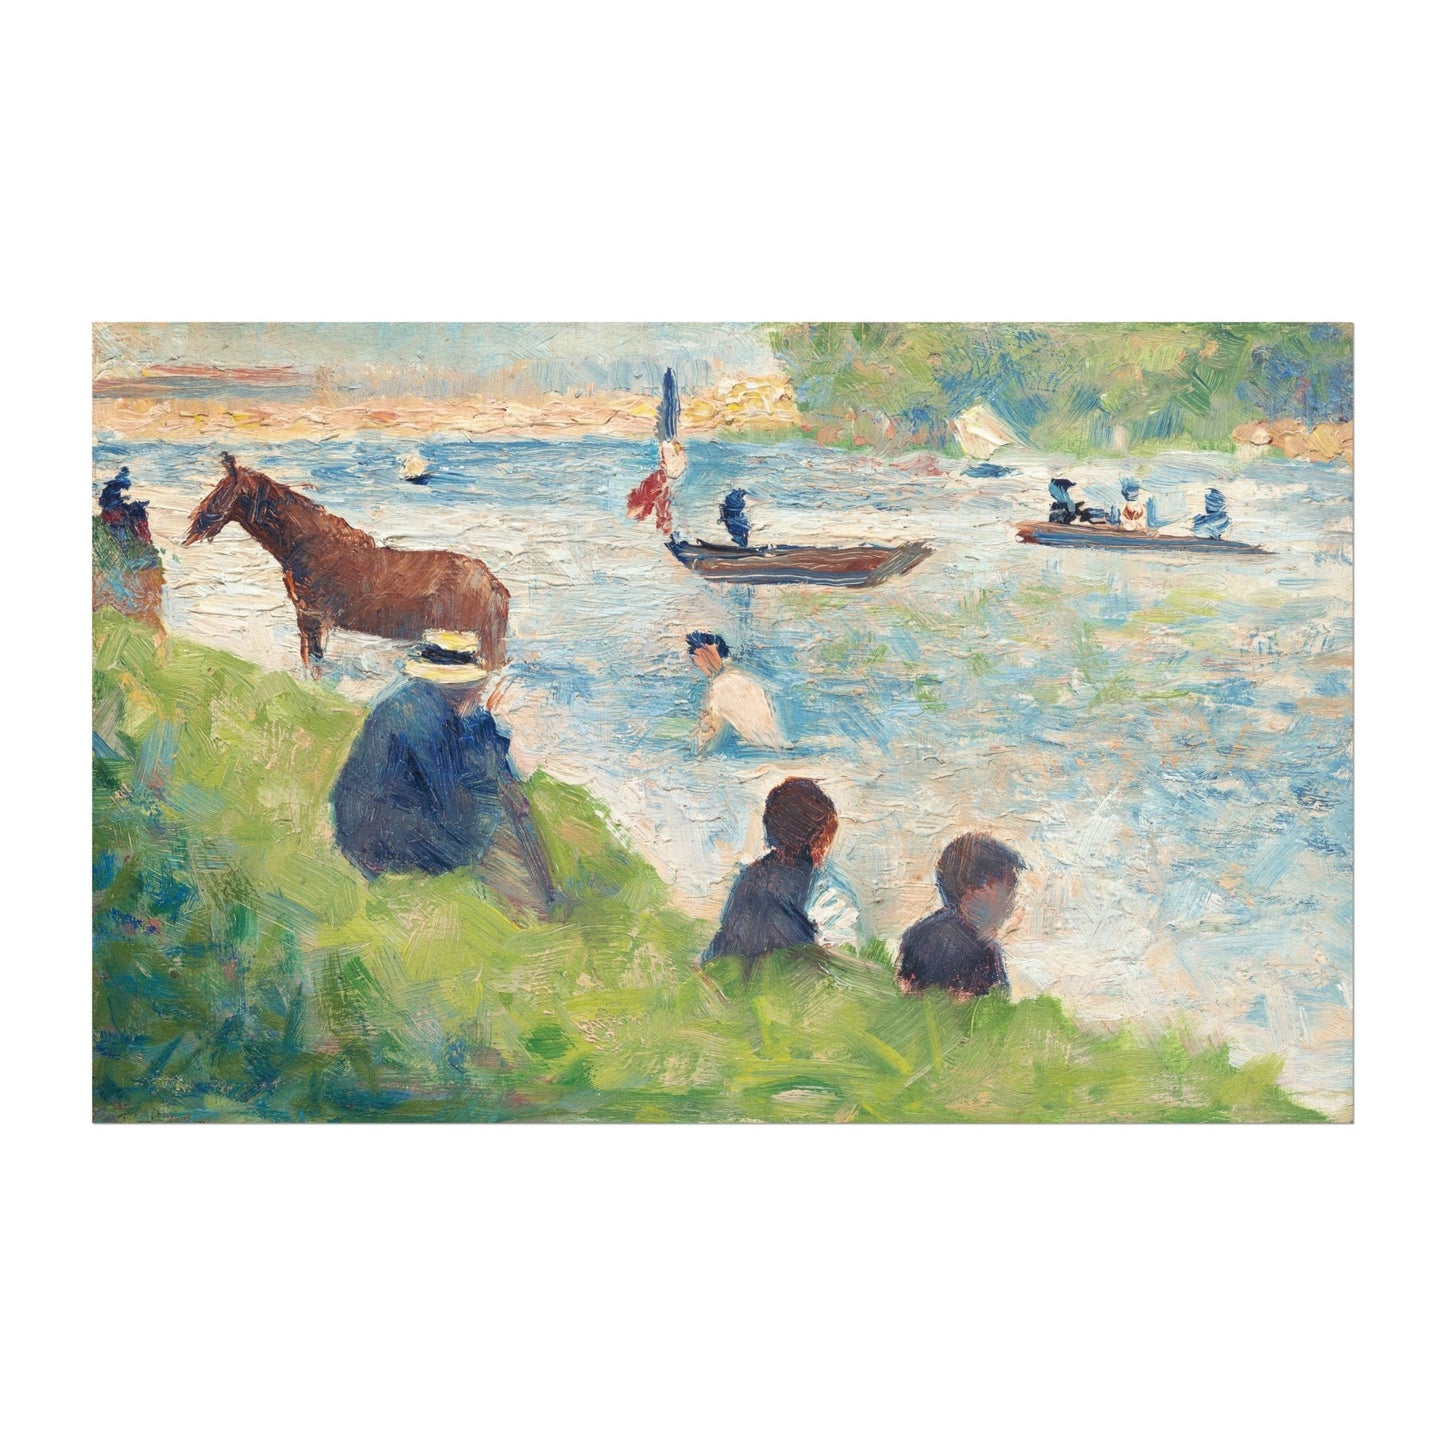 GEORGES SEURAT - Horse And Boats - Pathos Studio -